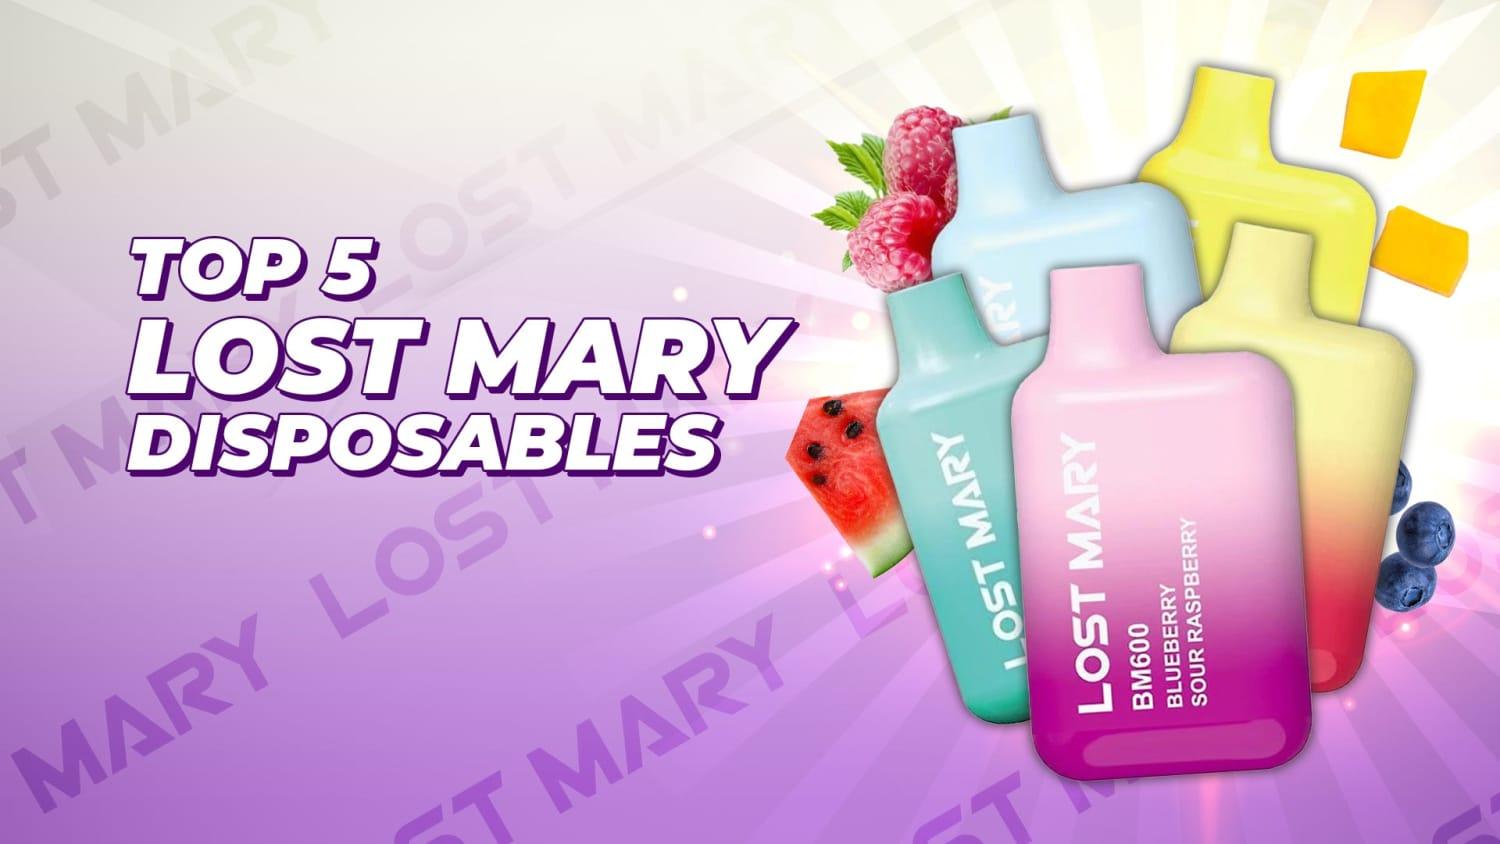 Top 5 Lost Mary BM600 Disposable Vapes - Brand:Elf Bar, Brand:Lost Mary, Category:Vape Kits, Sub Category:Disposables